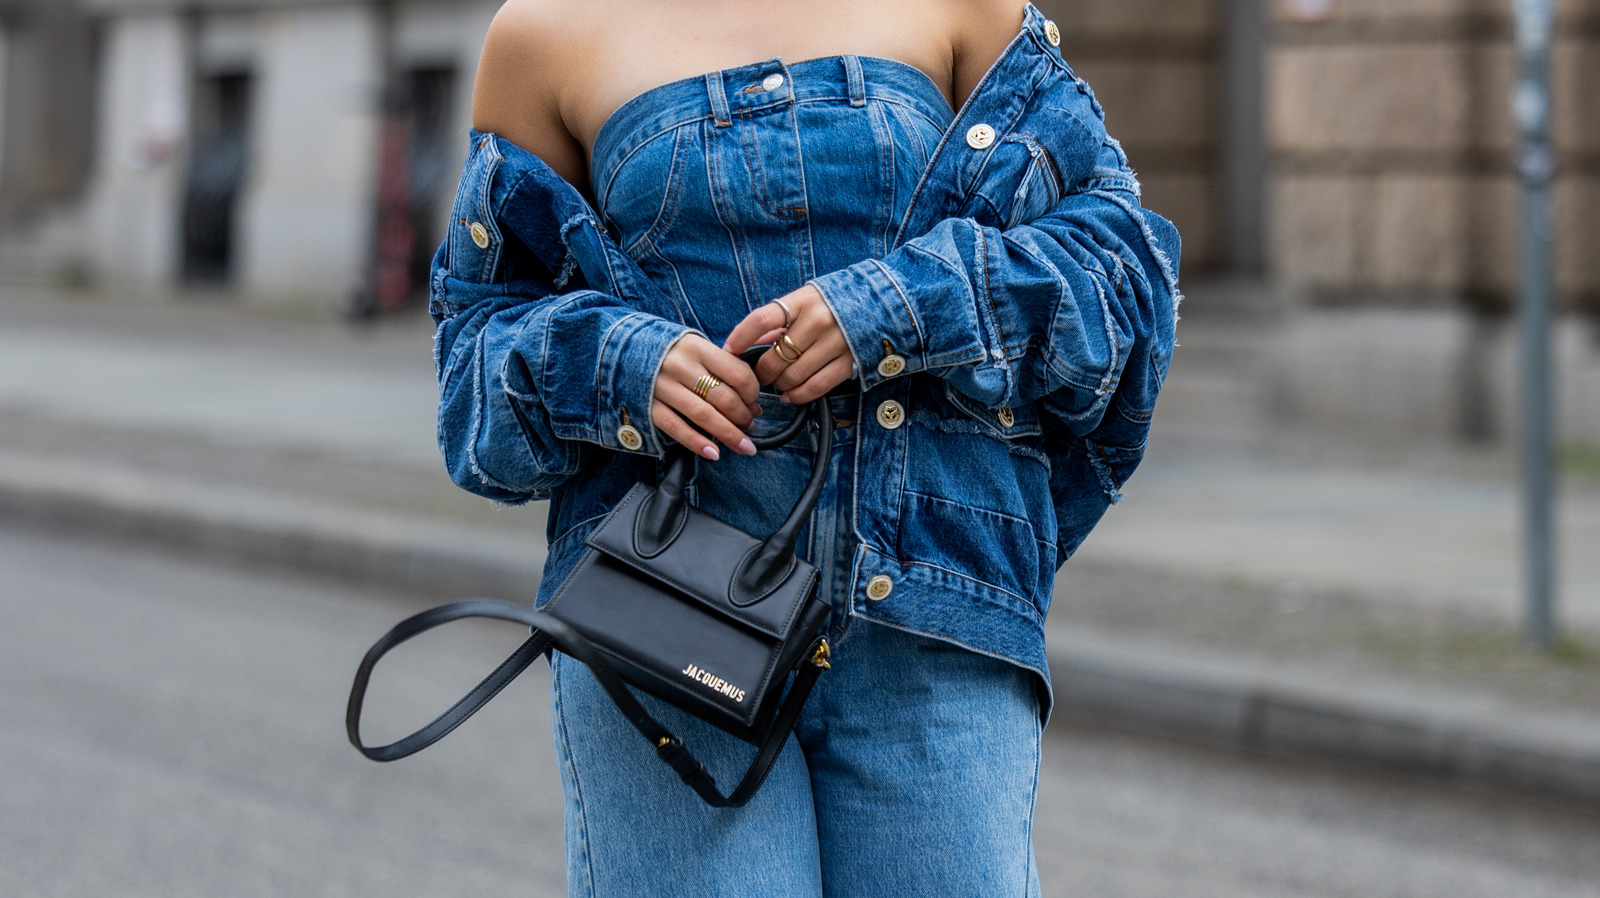 The Mini Bag Trend: Is It Here To Stay?